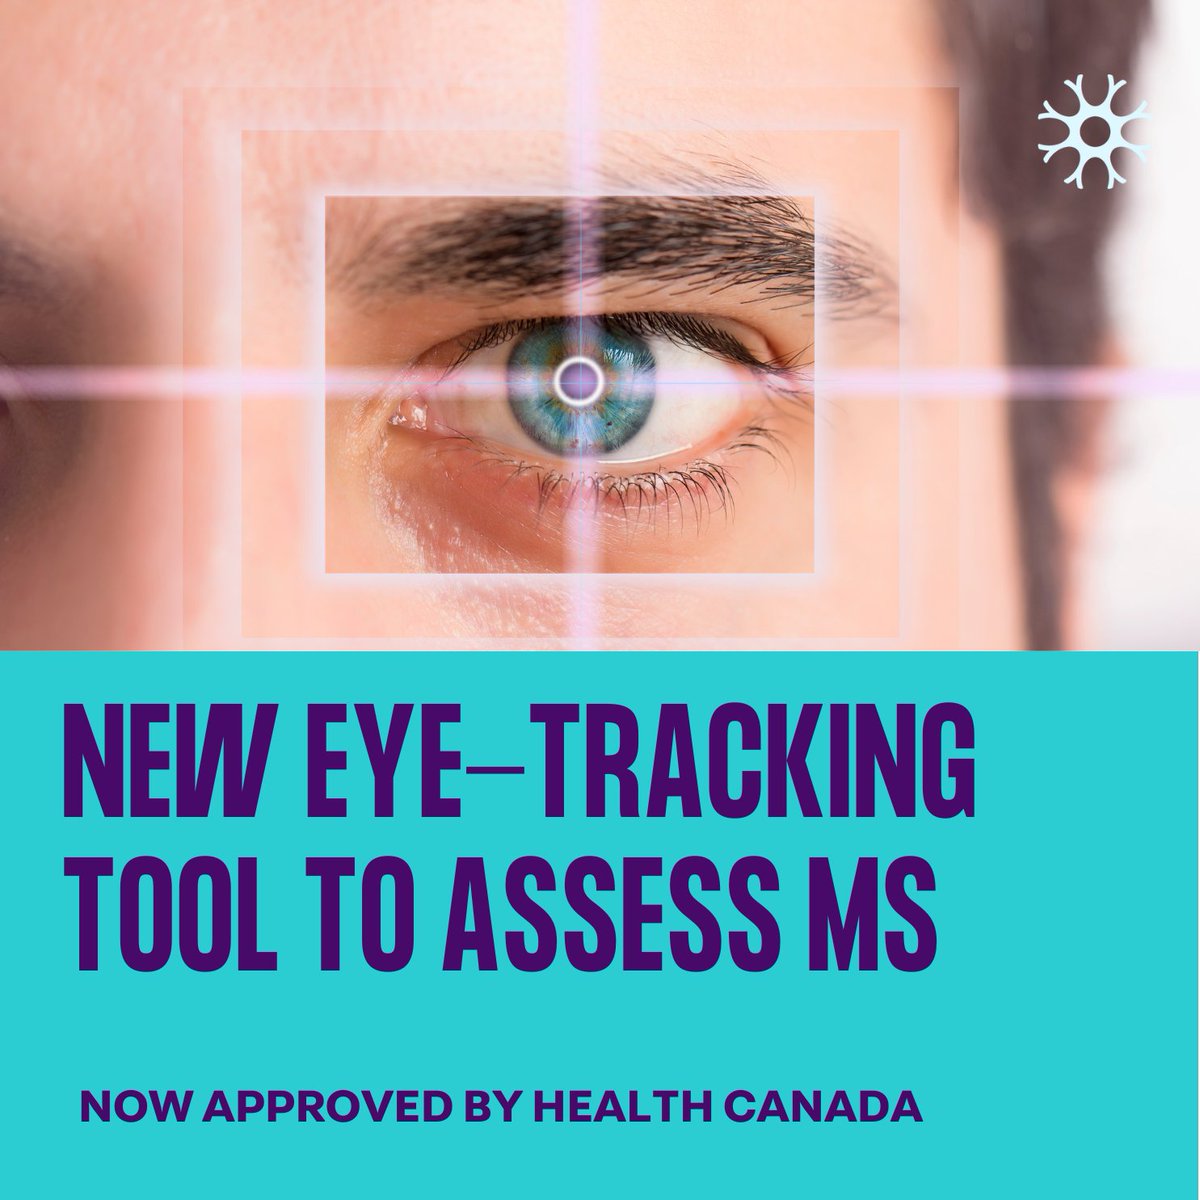 Health Canada has approved #ETNA eye-tracking software to assess #MS. An ongoing observational study at the CRU is testing if it could accurately predict #EDSS score. If successful, more sensitive, real-time biomarkers would be available to clinicians. cru.mcgill.ca/ms.